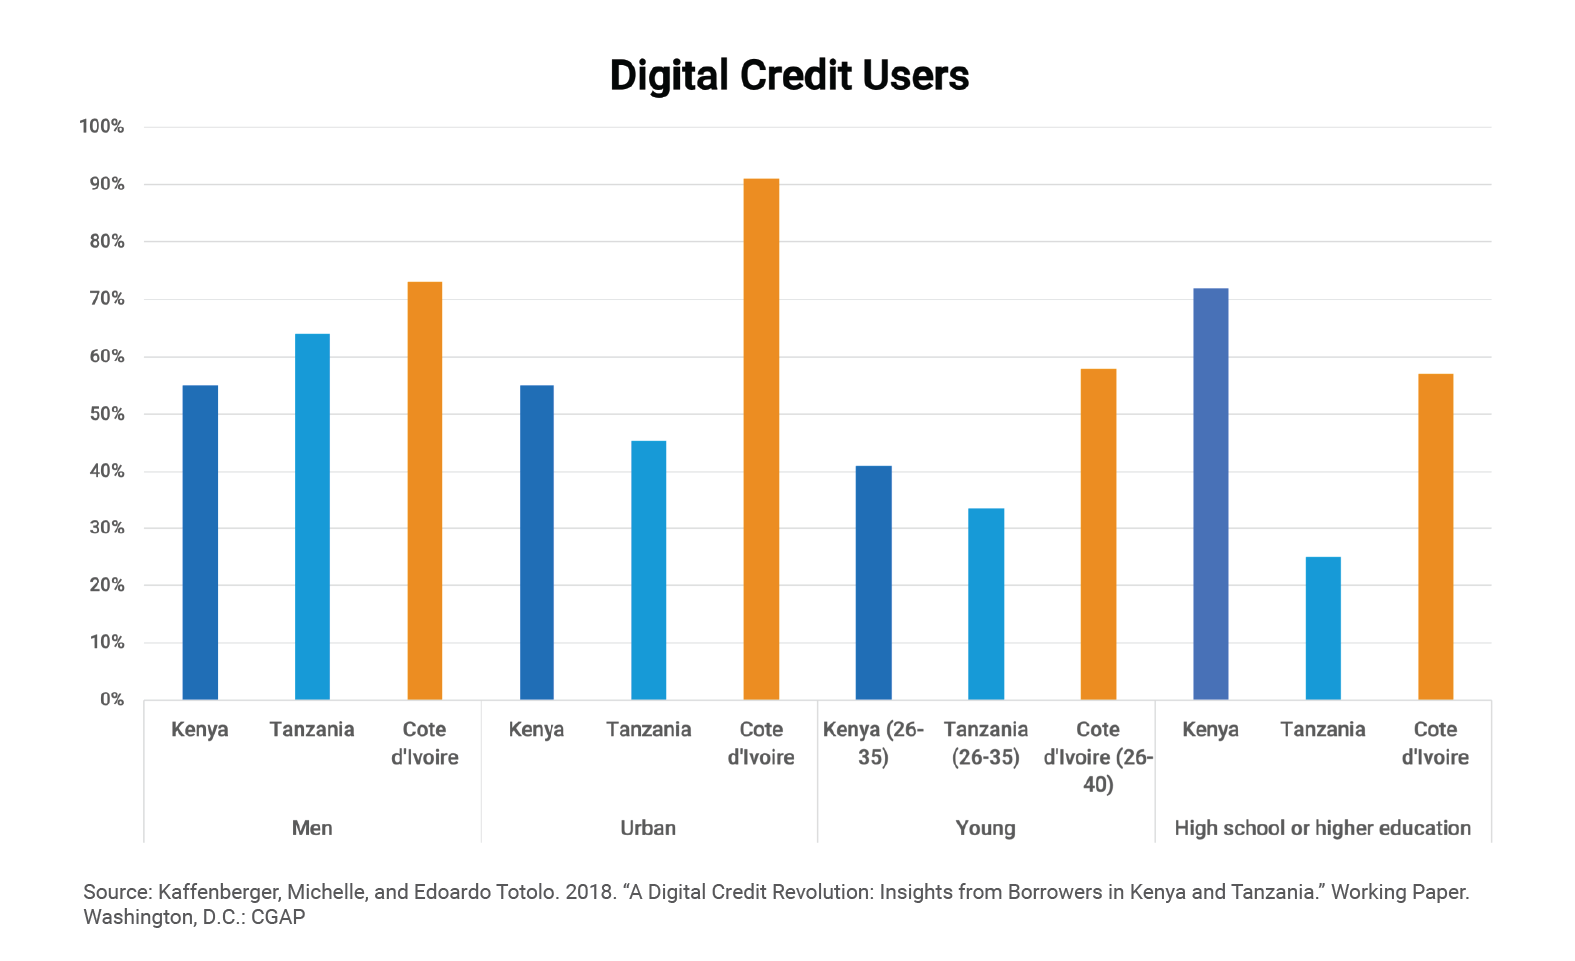 Digital credit users by country (Kenya, Tanzania, Ivory Coast) and category (Men, Urban, Young, High school education or higher)